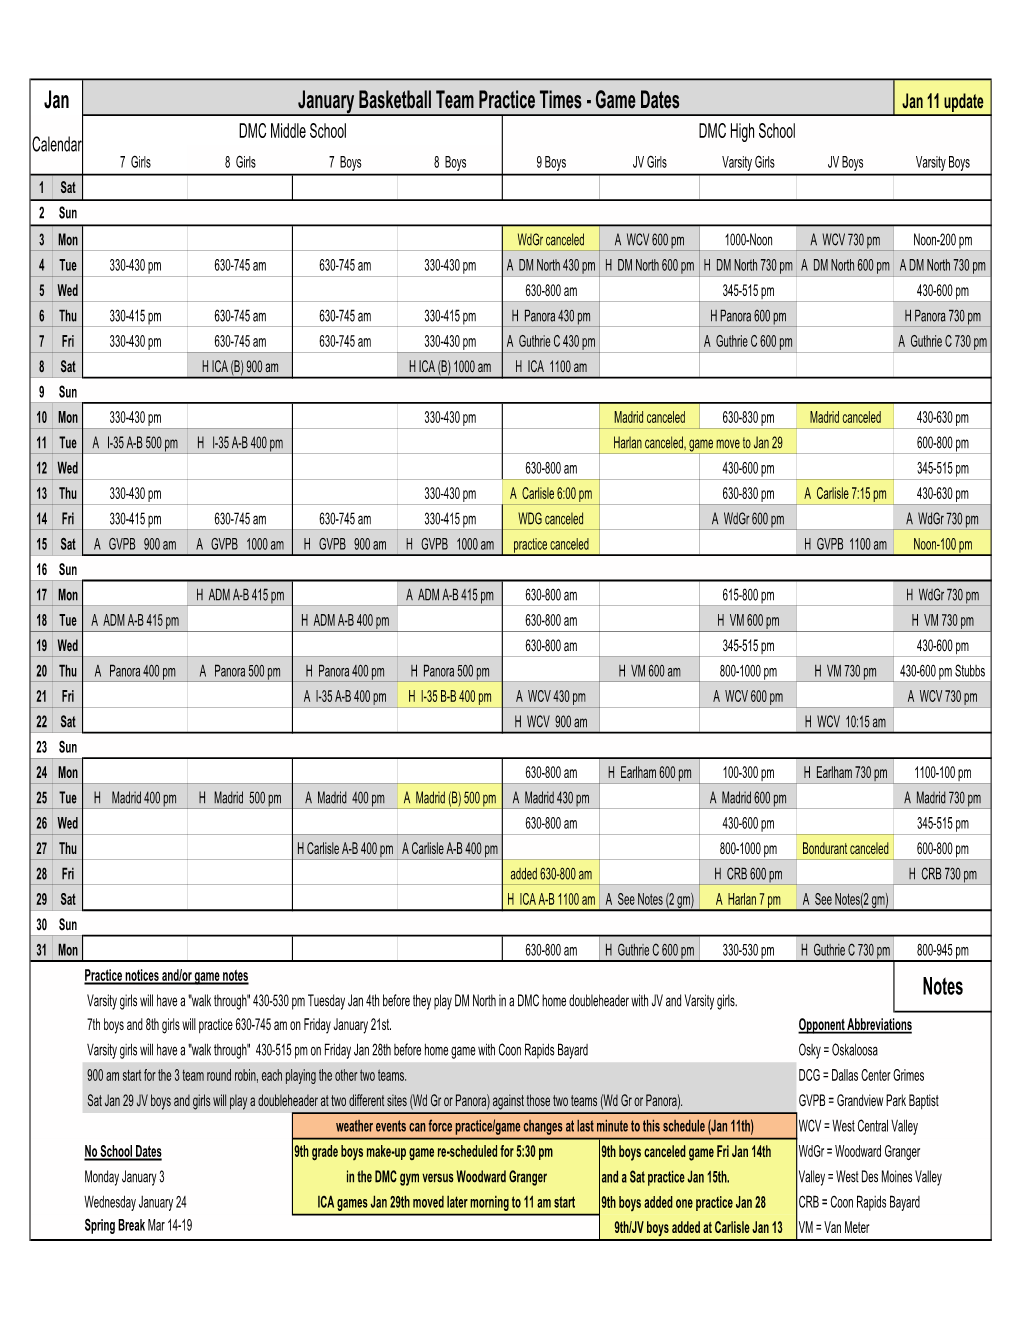 2010 Master DMC Game and Practice Schedules 12 17 10